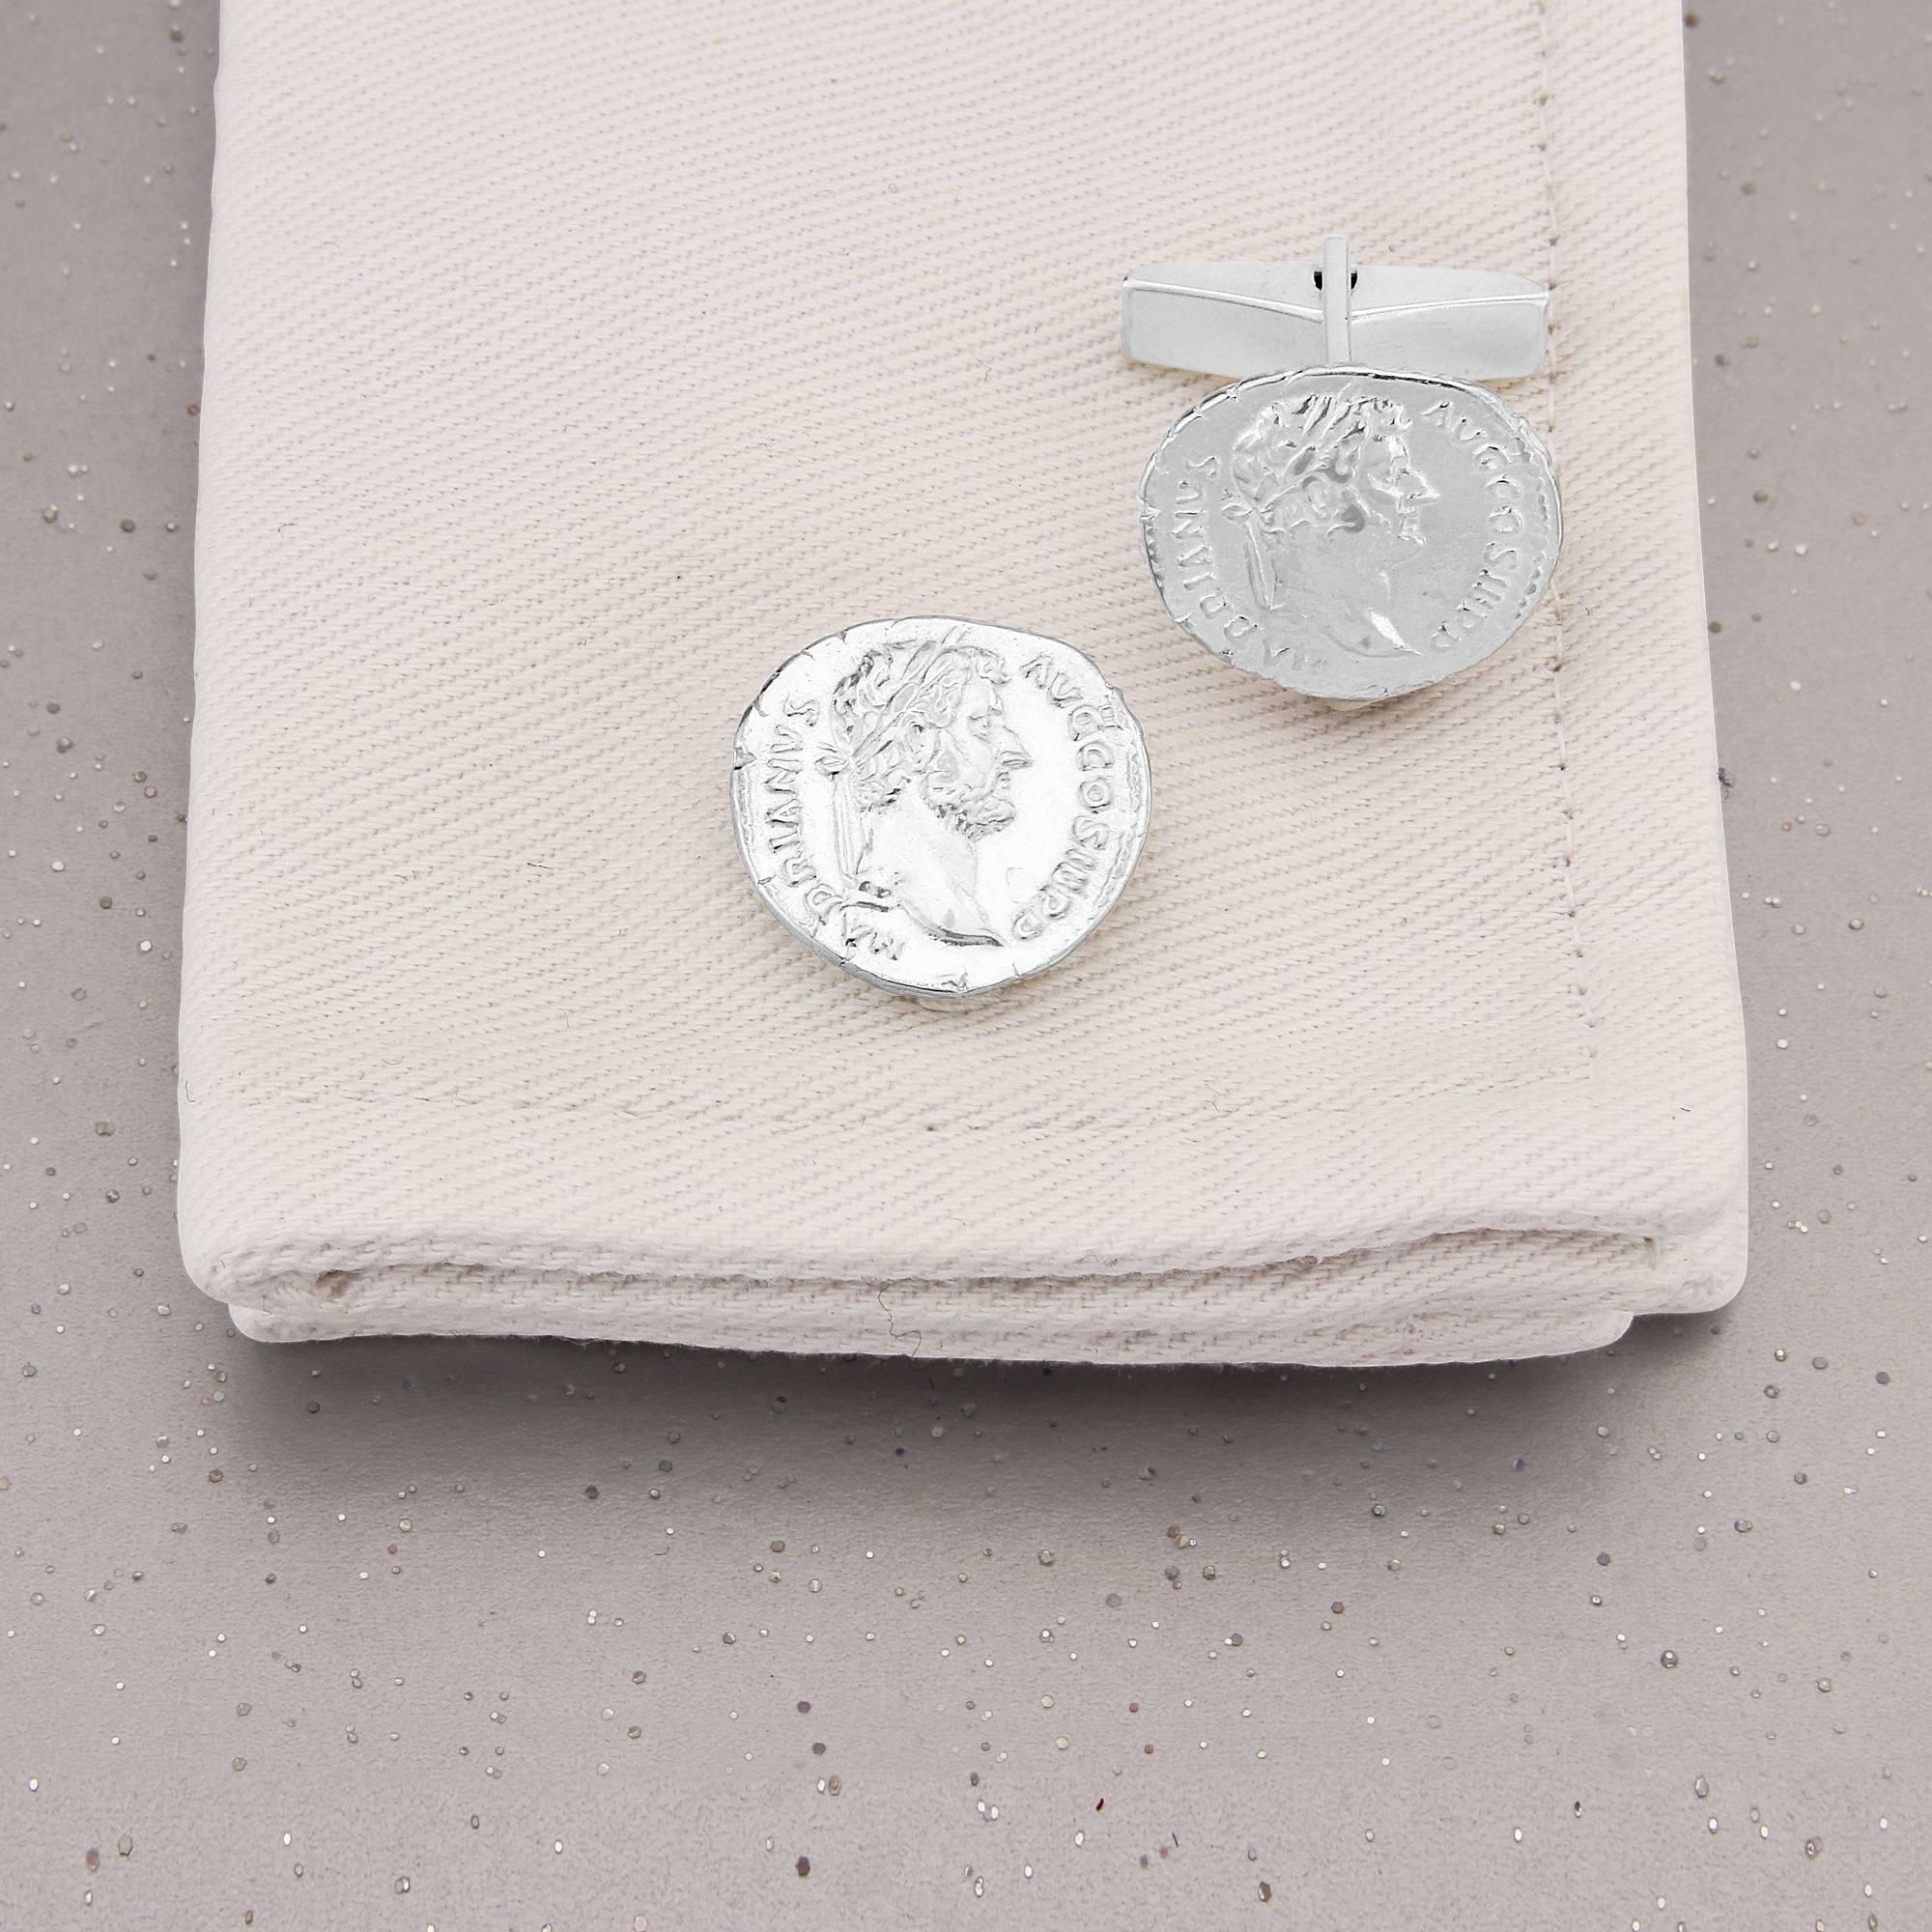 Roman History on your cuffs! Stunning replica of an ancient original coin featuring Emperor Hadrian, in Sterling Silver.
This interesting design is taken from an old Roman coin which was found in Jerusalem. Simon Kemp carefully took a mould of the